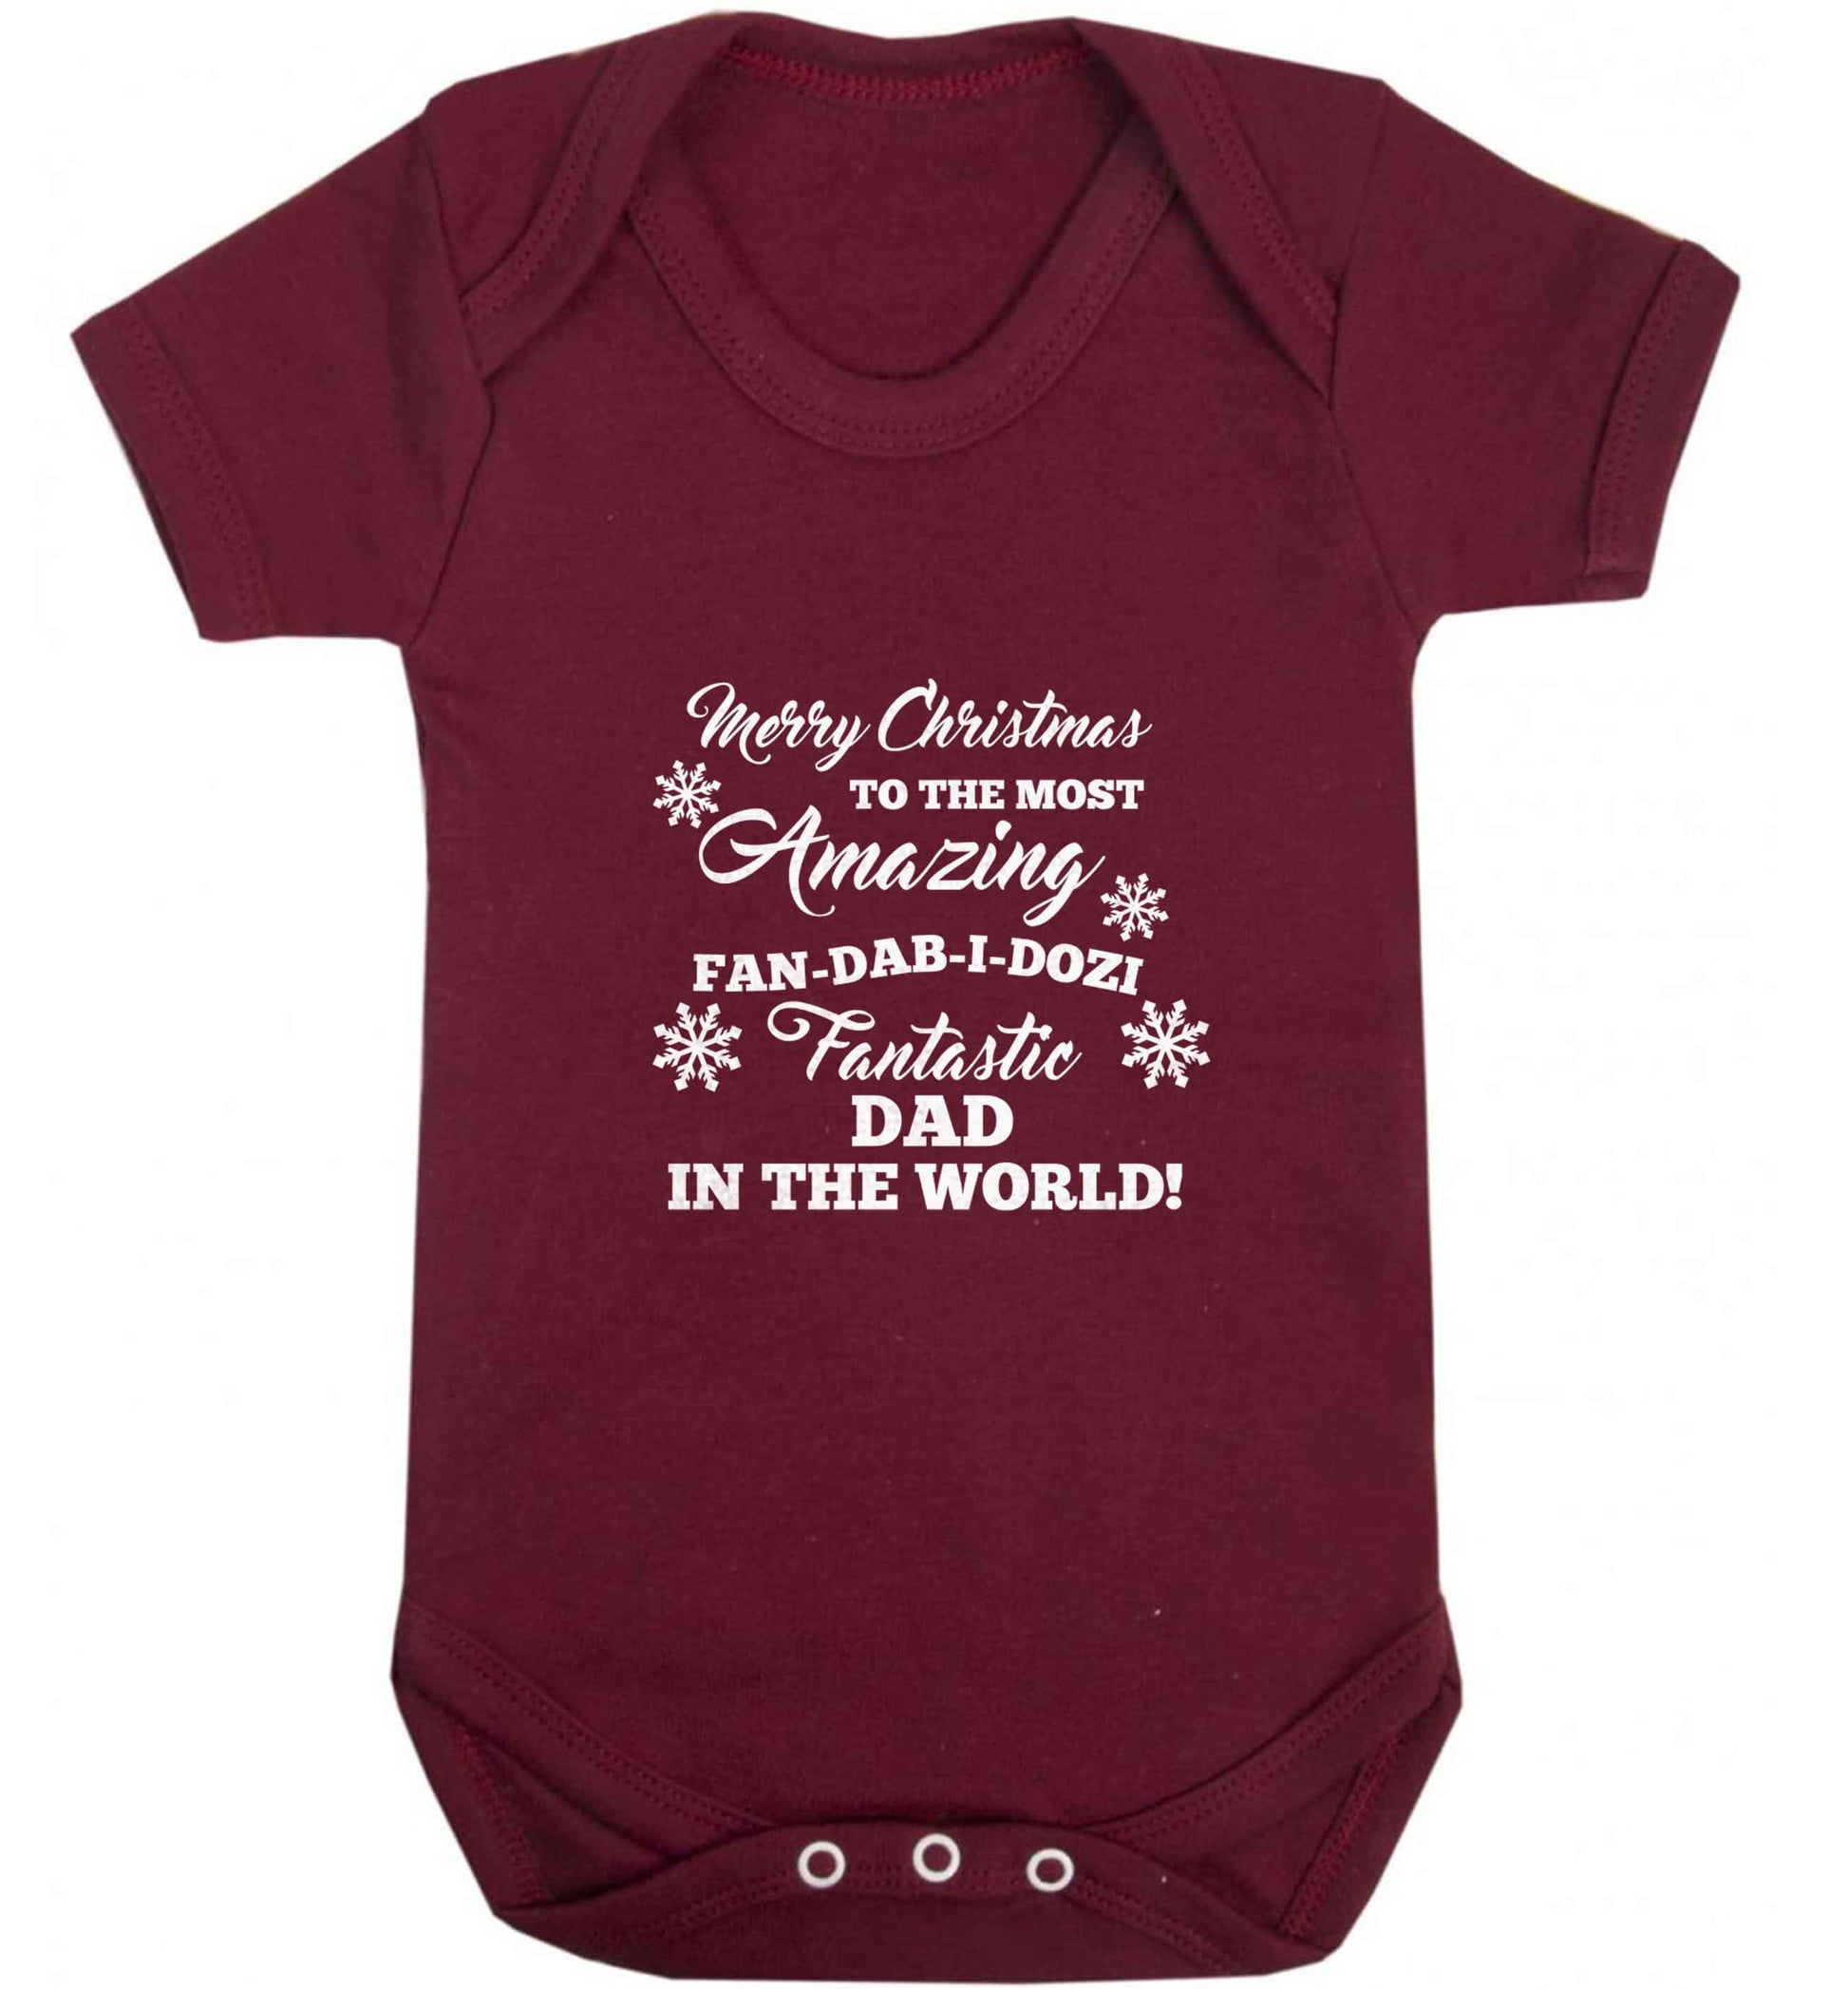 Merry Christmas to the most amazing fan-dab-i-dozi fantasic Dad in the world baby vest maroon 18-24 months